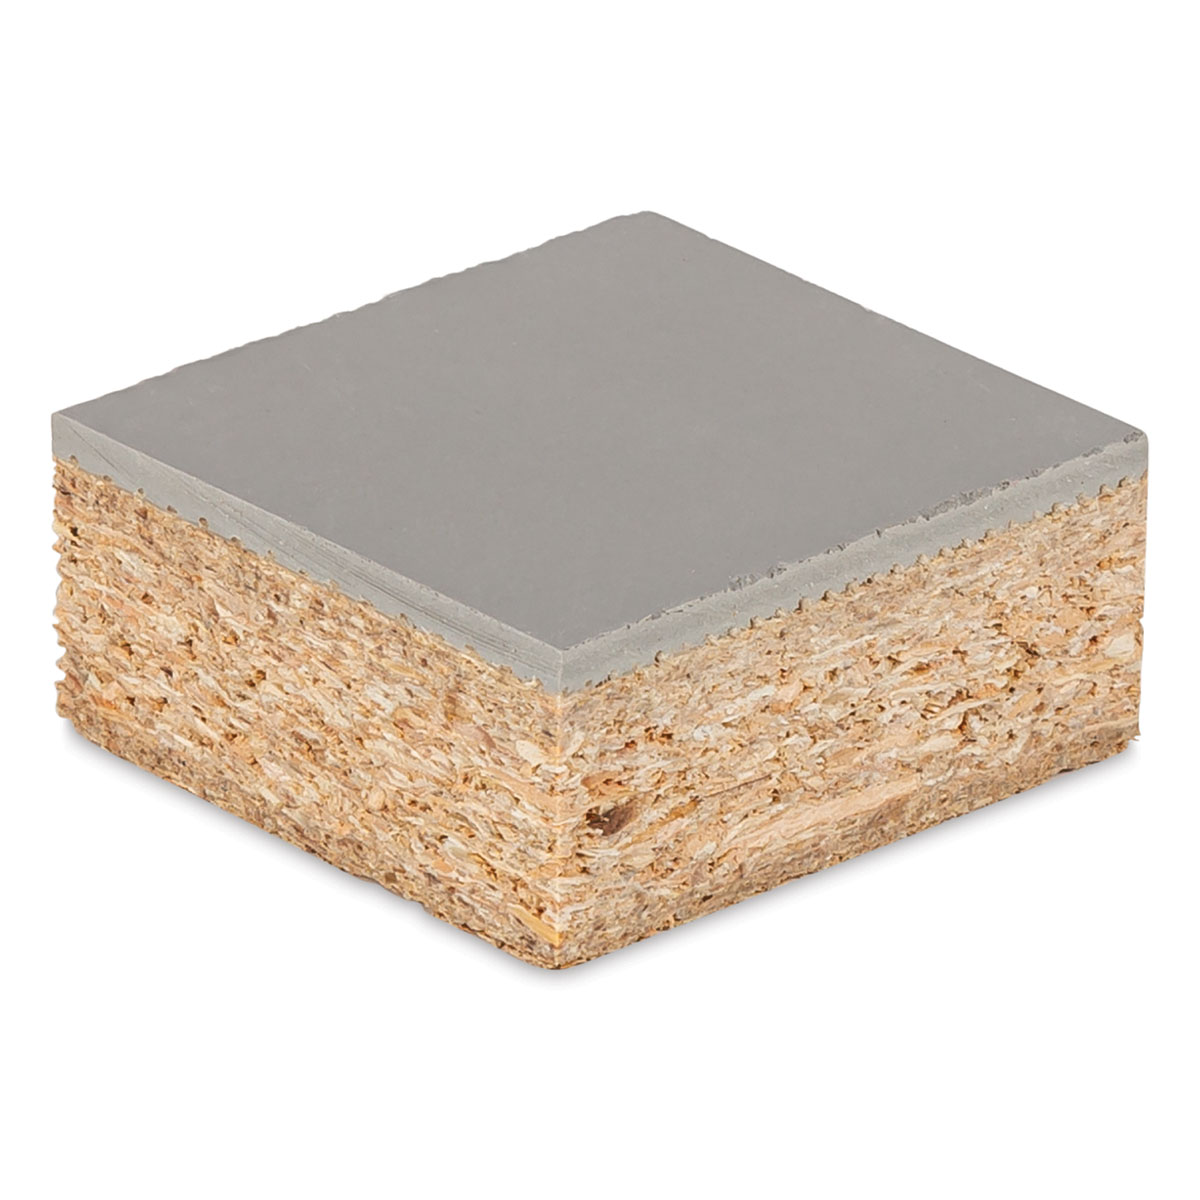 4310 Premium Mounted Linoleum Block – Fine, Flat Surface for Easy Carving